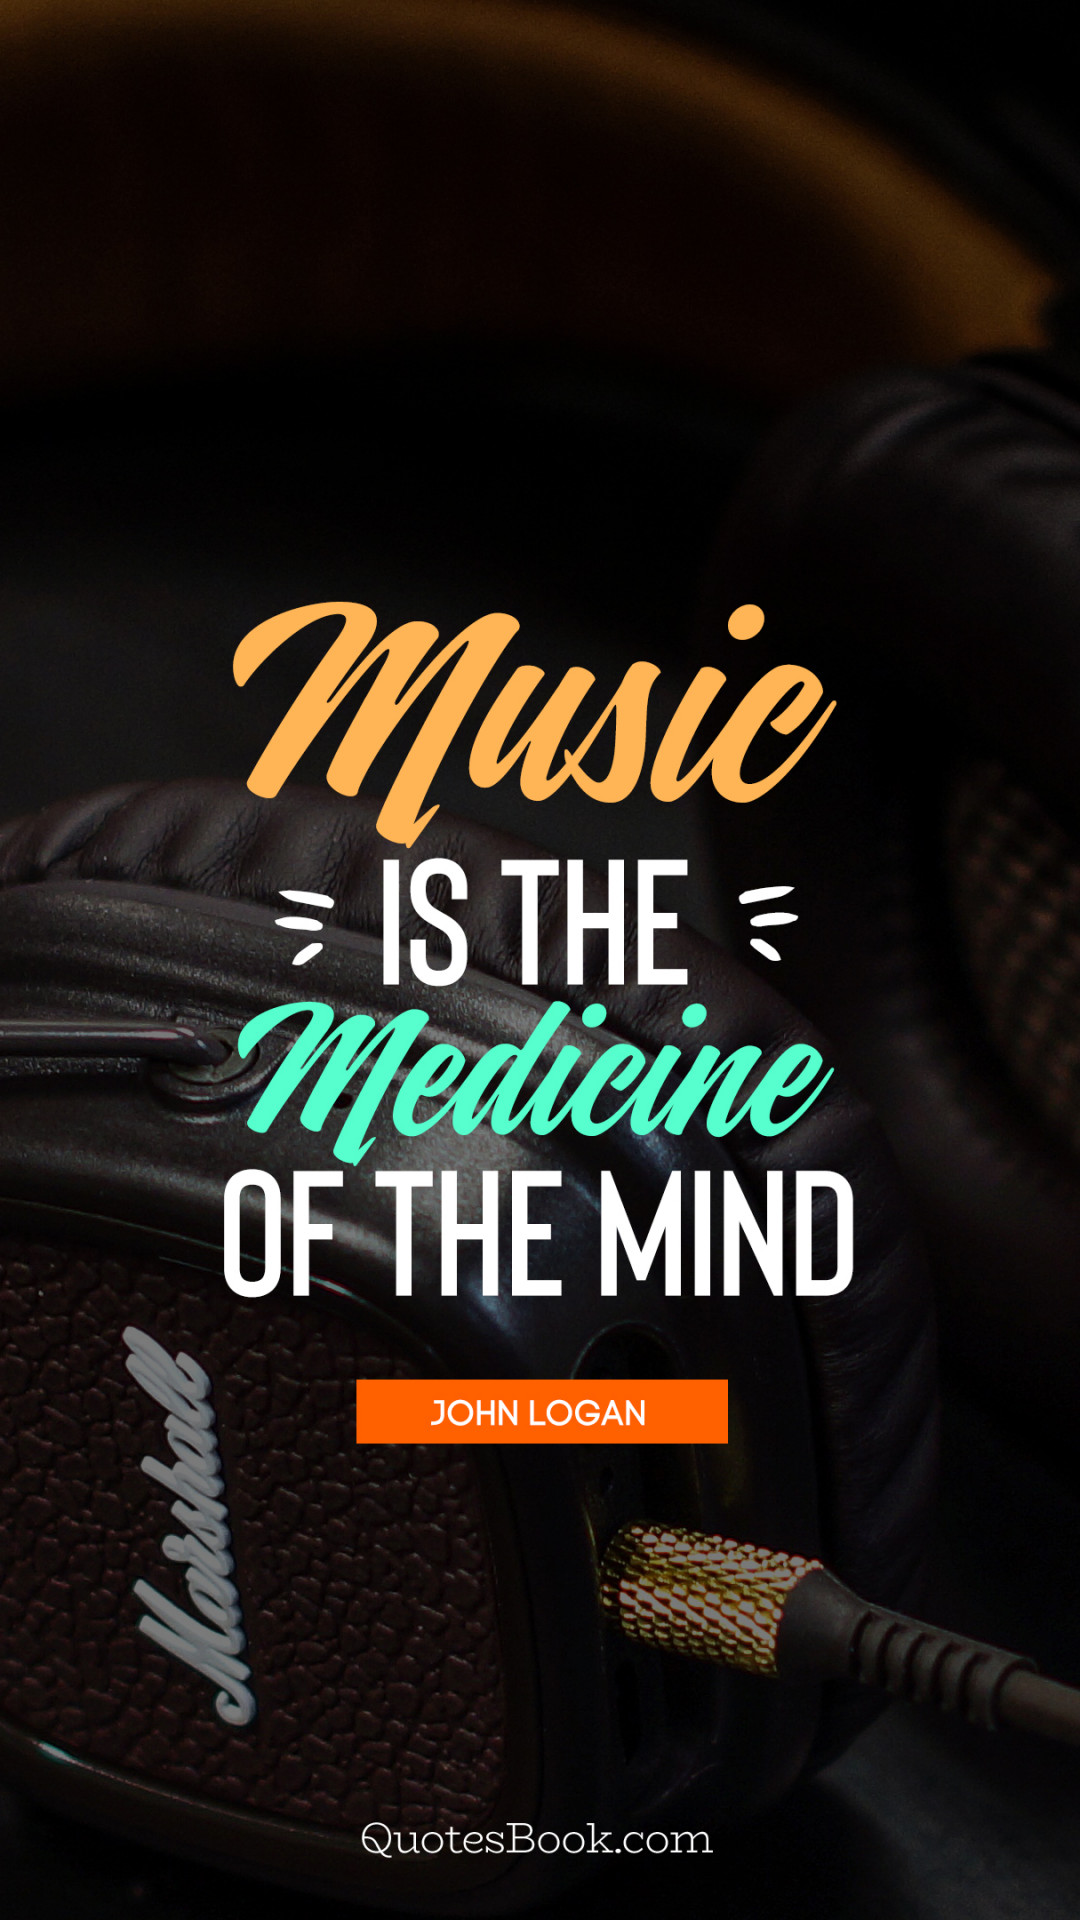 Music is the medicine of the mind. - Quote by John Logan - QuotesBook